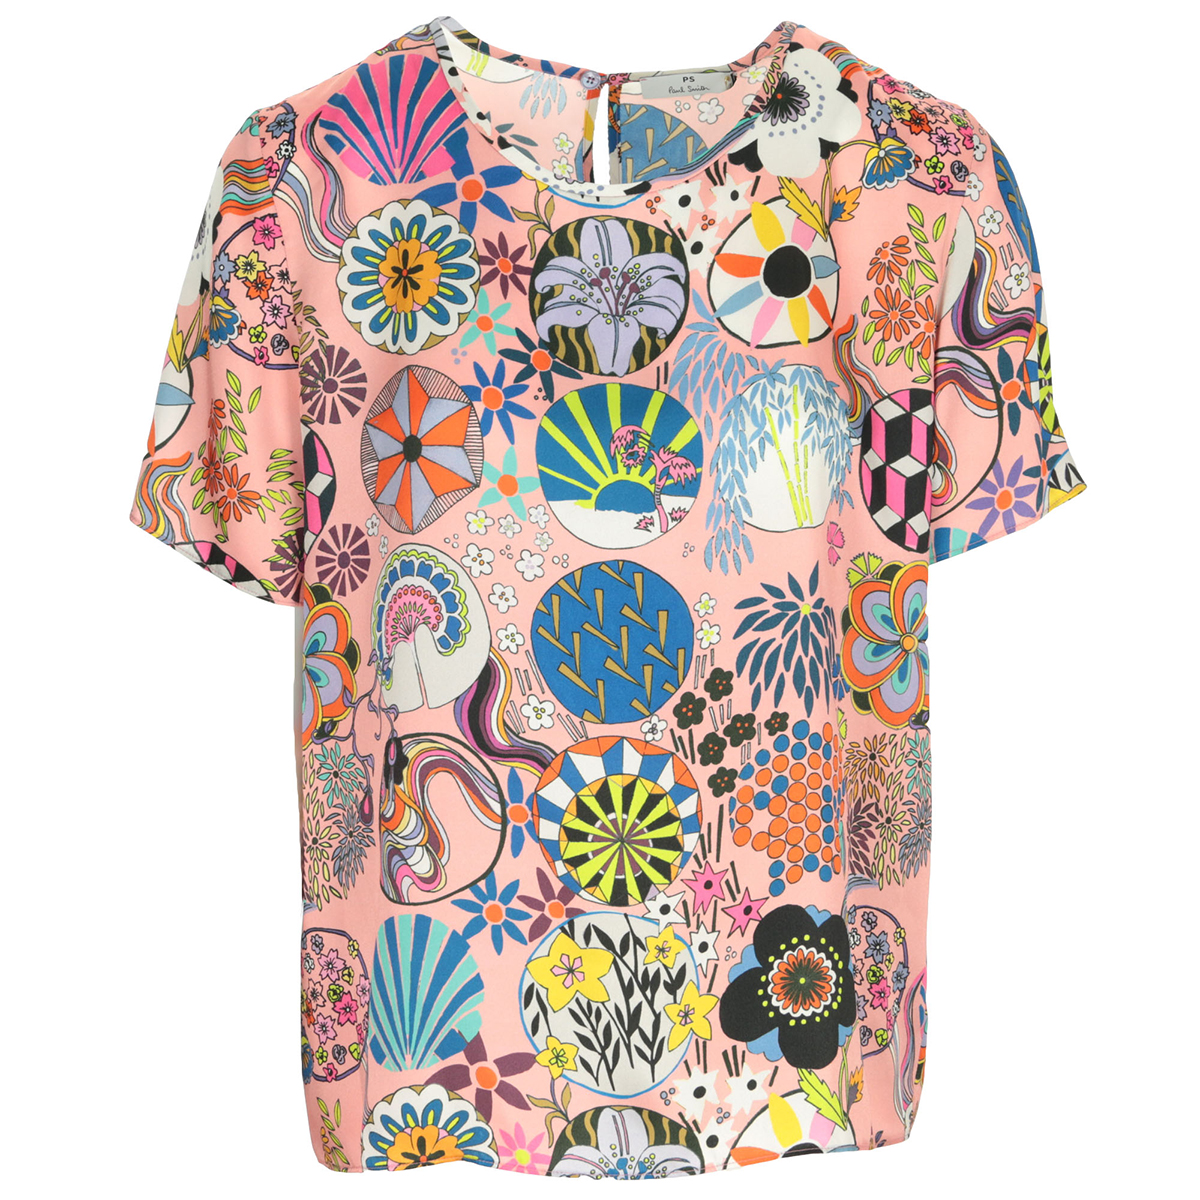 PS by Paul Smith Top